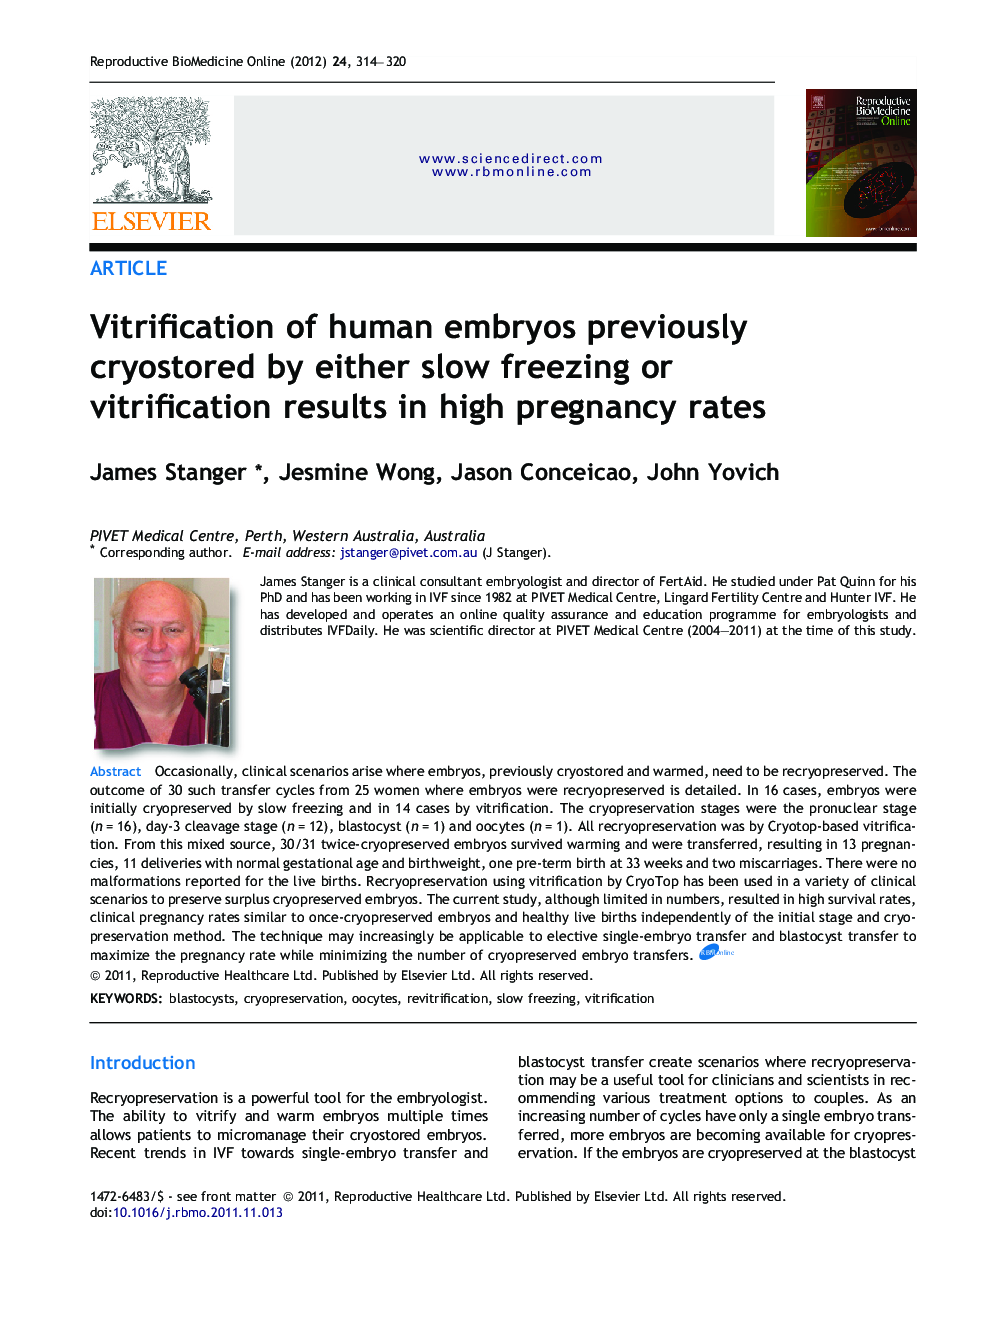 Vitrification of human embryos previously cryostored by either slow freezing or vitrification results in high pregnancy rates 